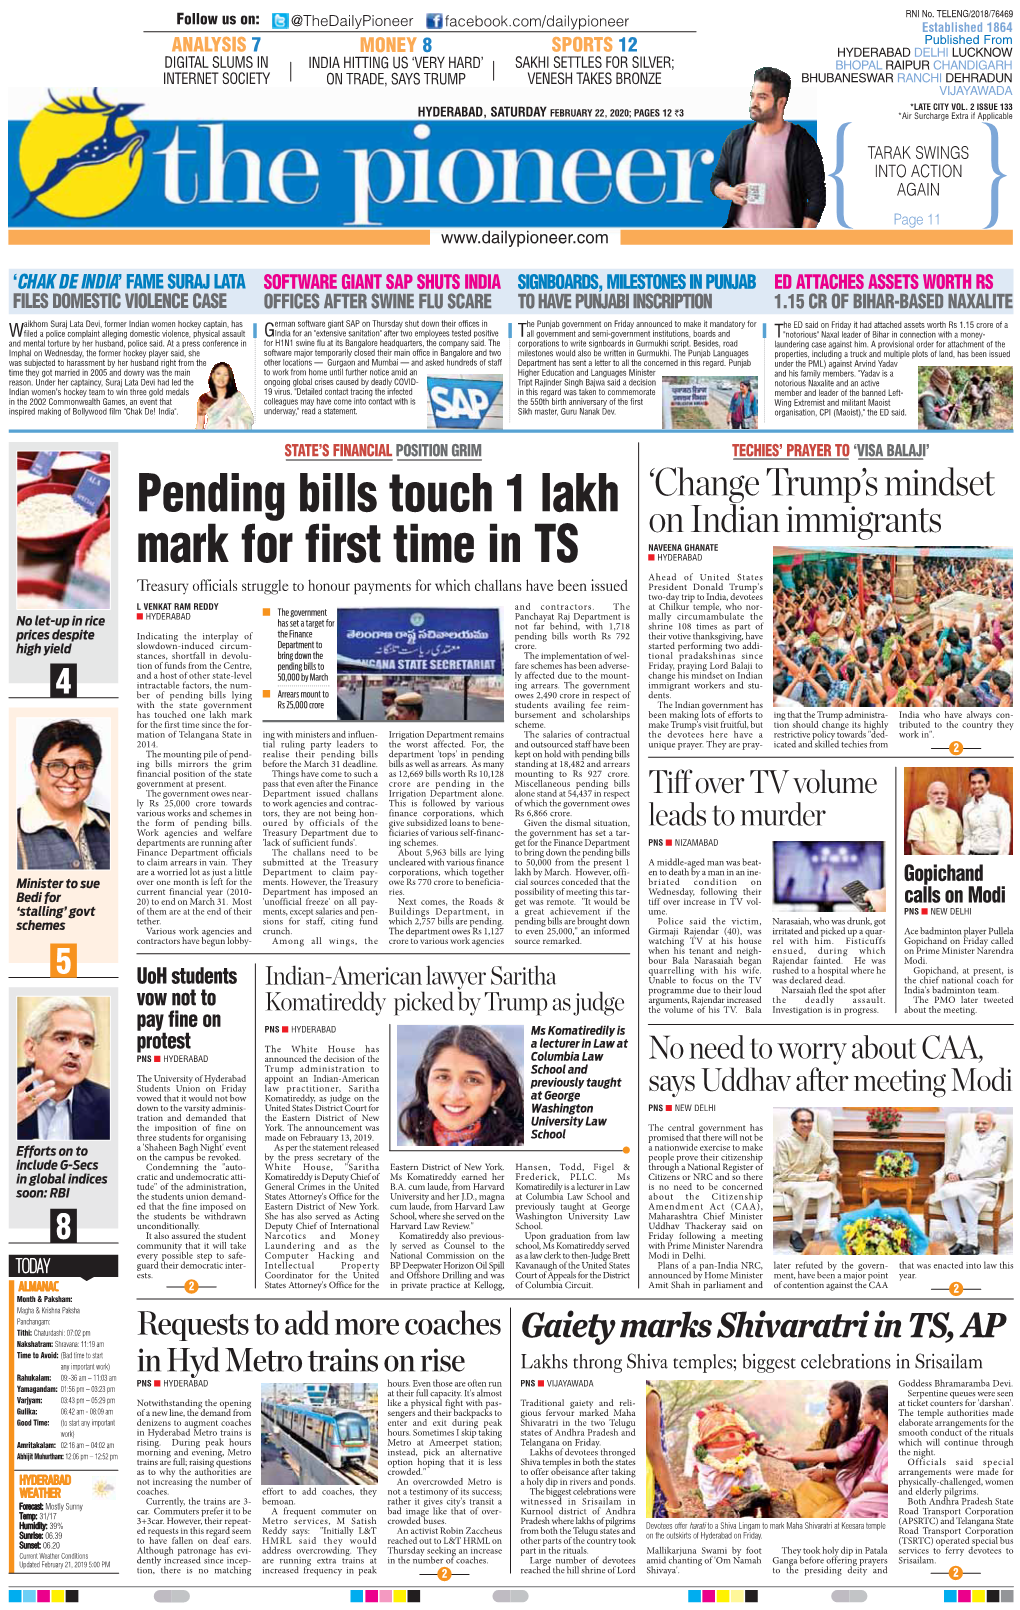 Pending Bills Touch 1 Lakh Mark for First Time in TS